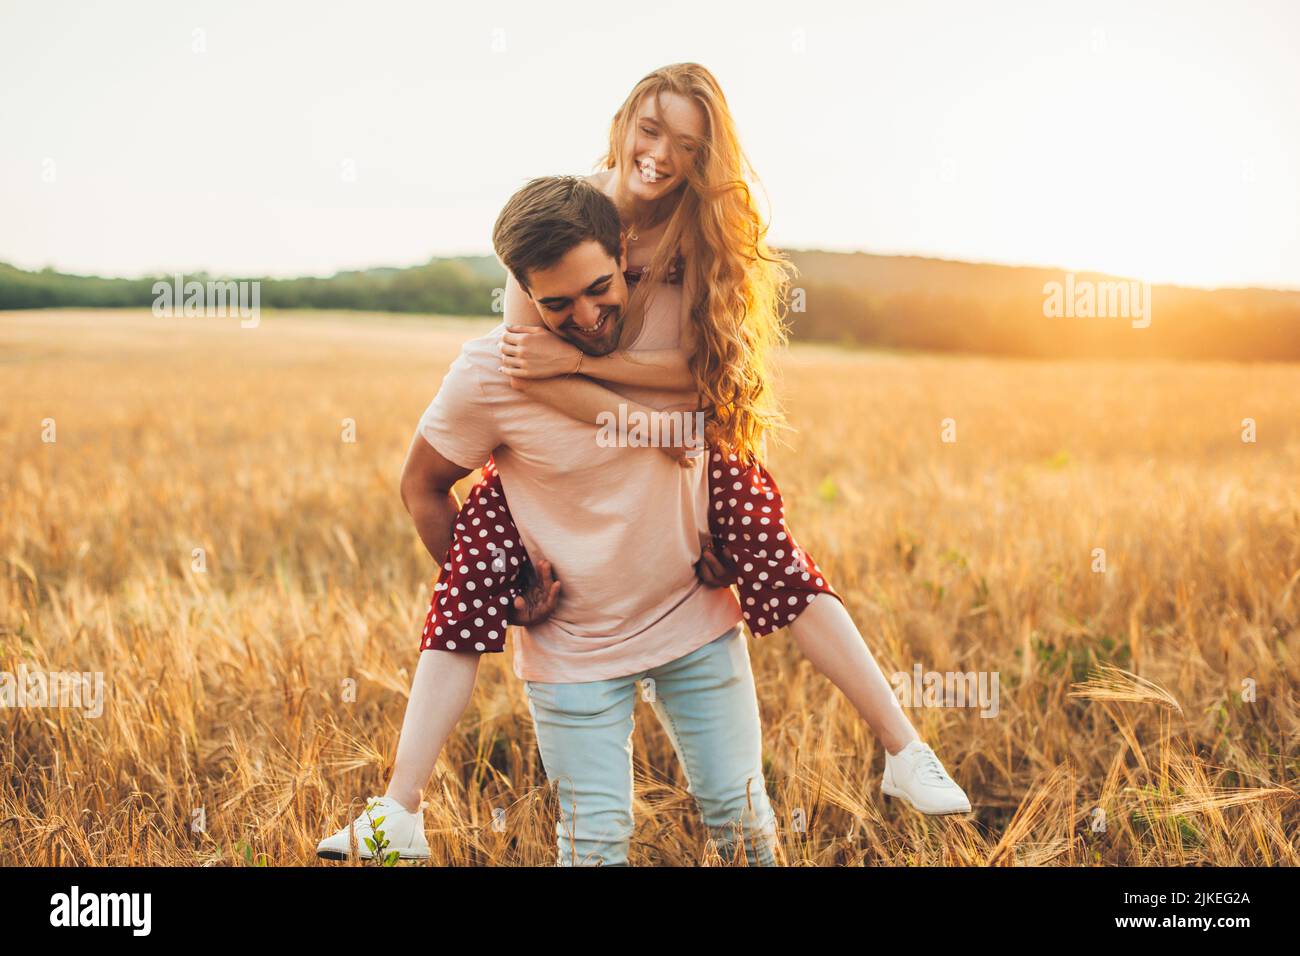 Caucasian woman enjoying piggy back ride with her boyfriend, enjoy a relaxing day in the countryside in a colorful yellow rapeseed field. Activity Stock Photo